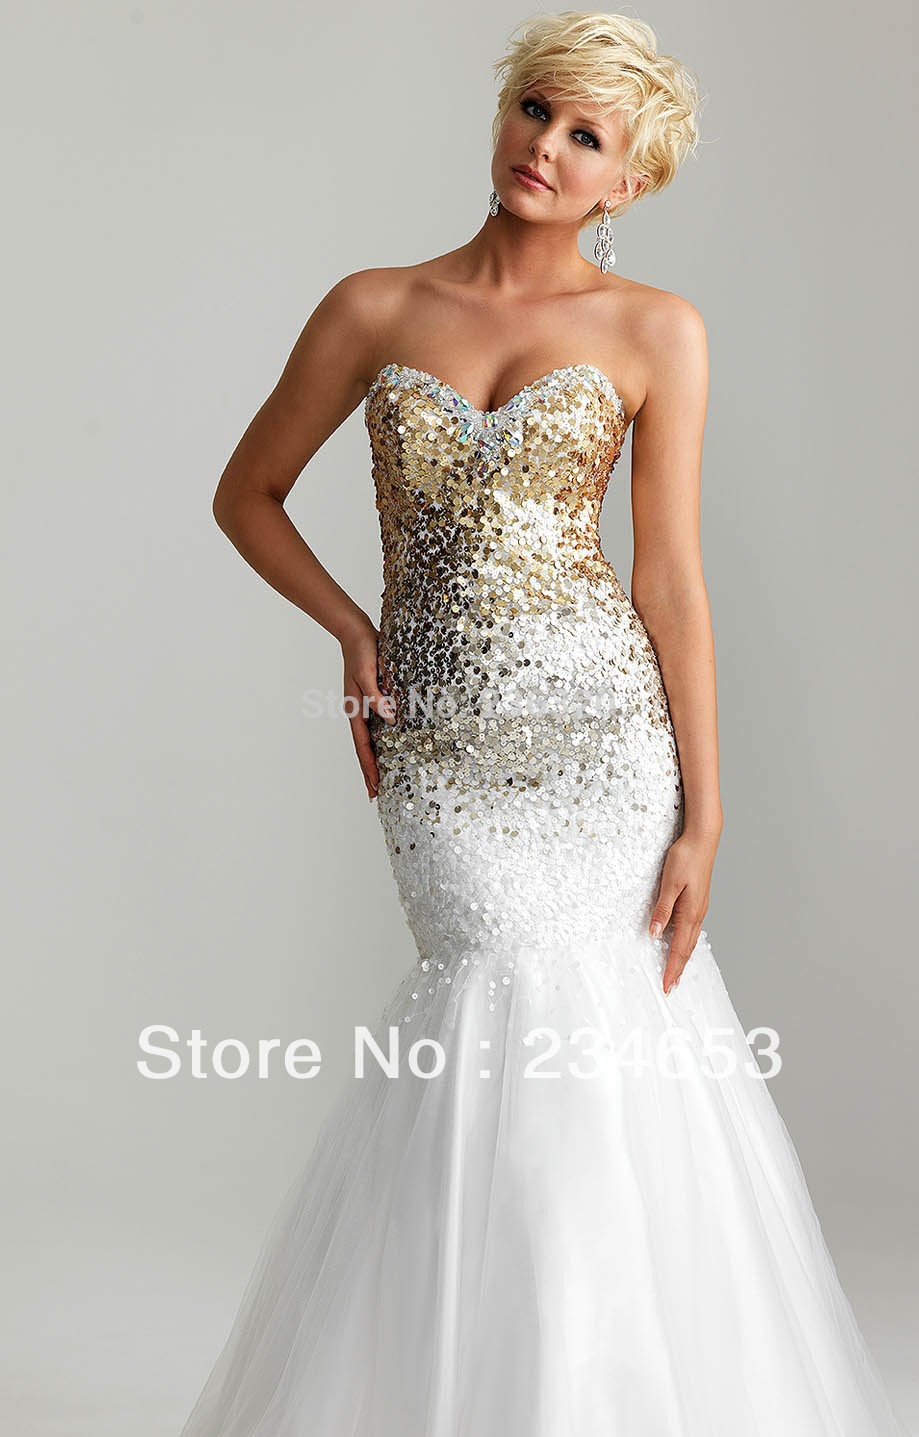 White Dress Gold Sequins & Make You Look Thinner